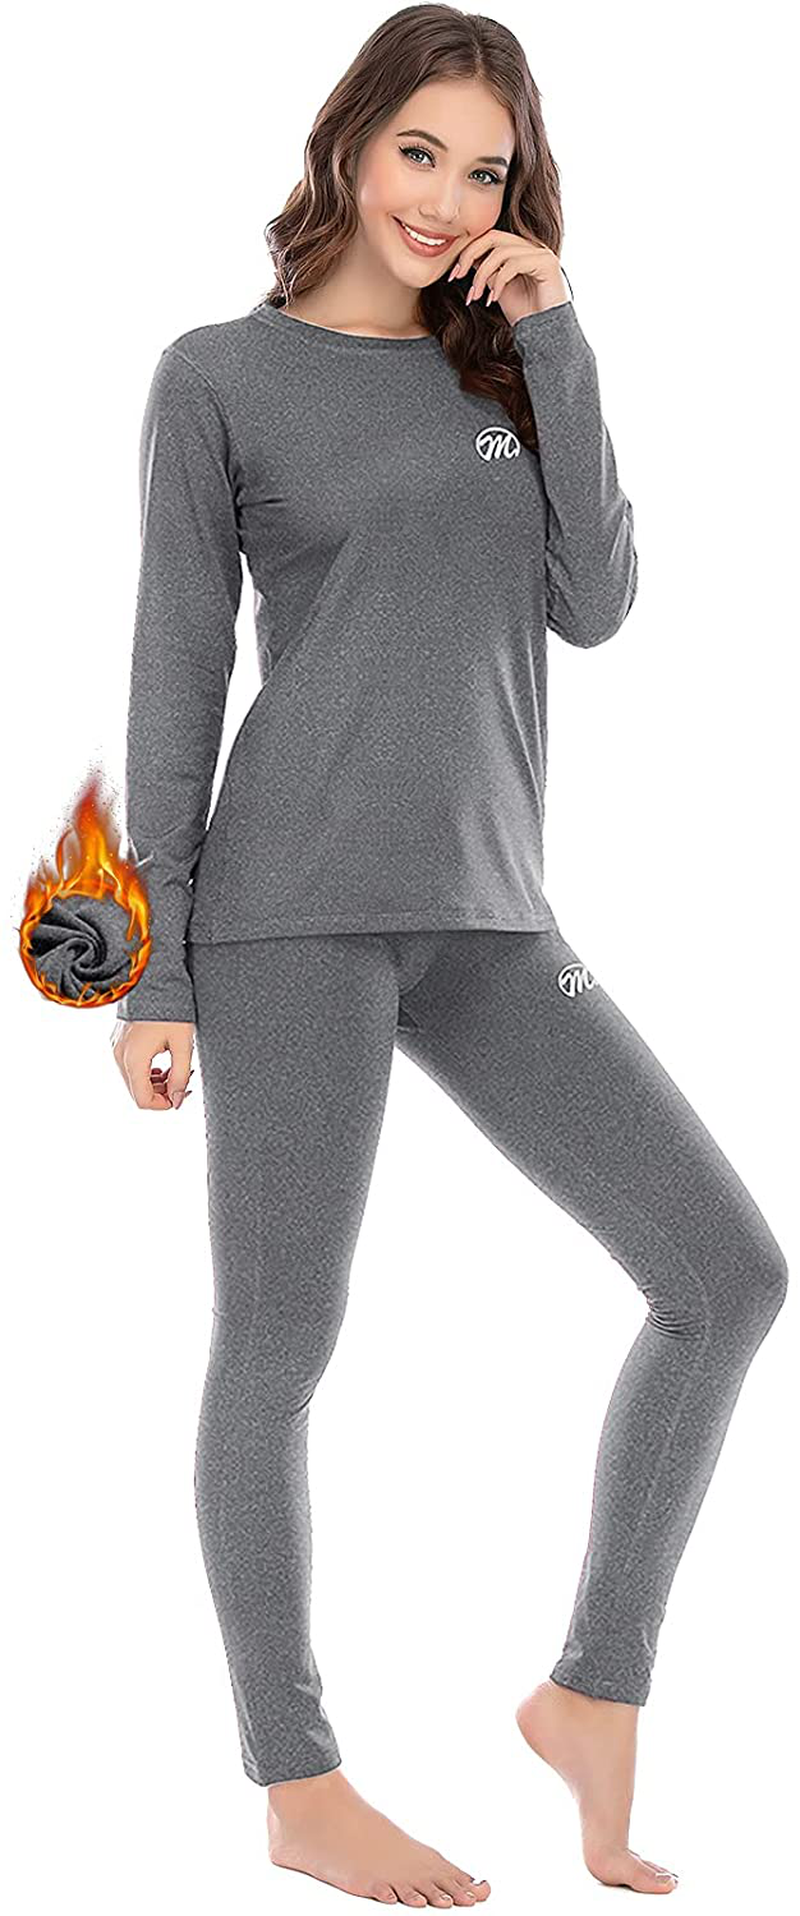 MEETWEE Thermal Underwear for Women, Winter Warm Base Layer Top & Bottom Set Long Johns with Fleece Lined Cold Weather Skiing